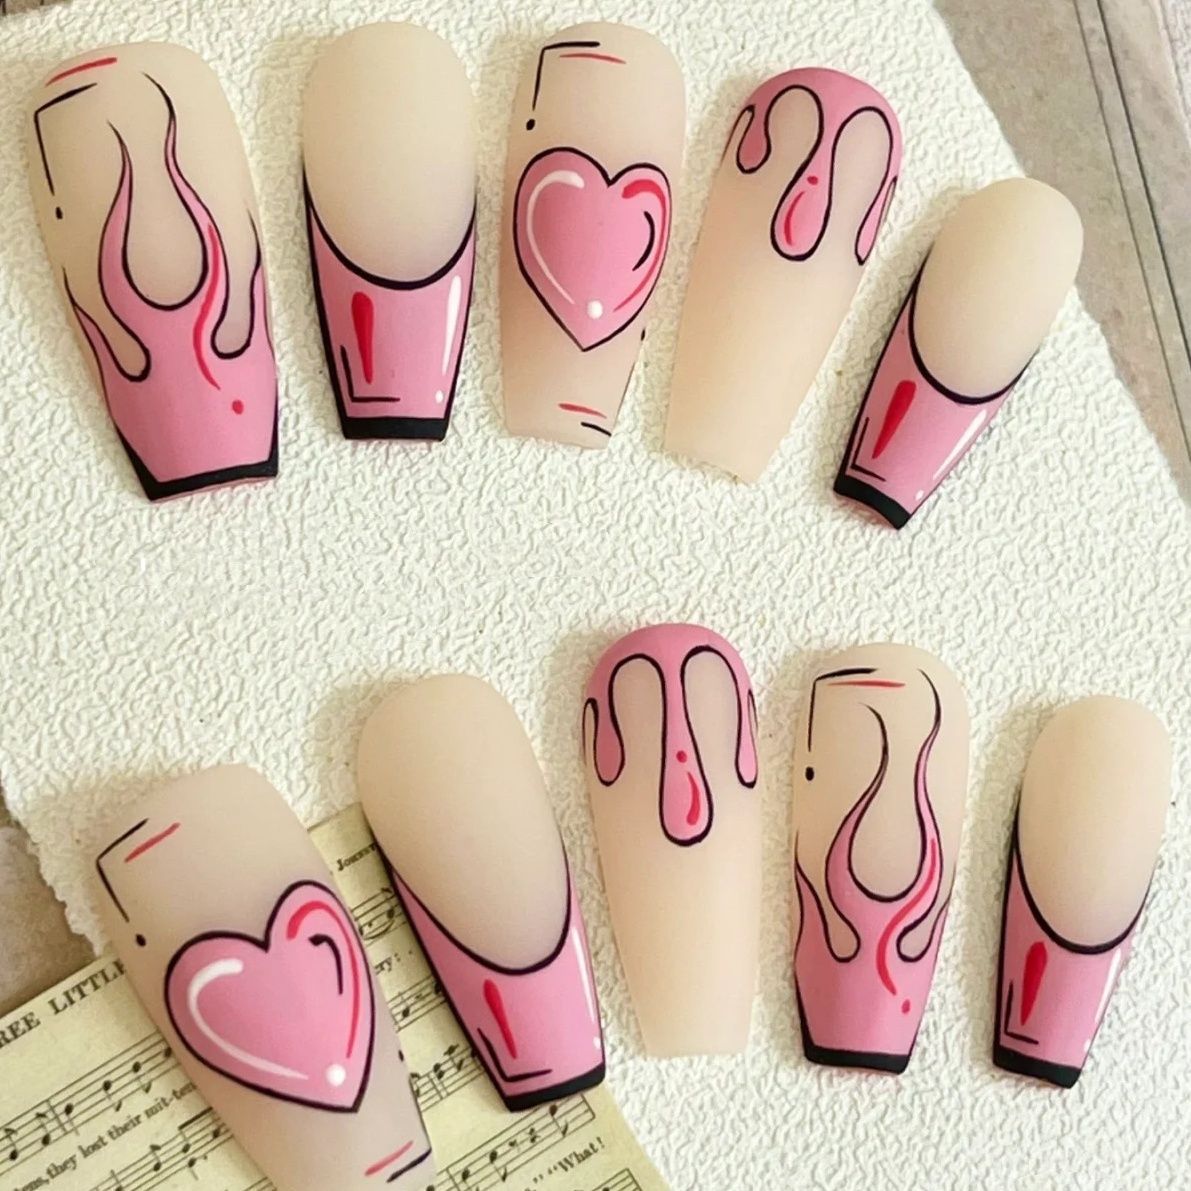 FIERY HEART - TEN PIECES OF HANDCRAFTED PRESS ON NAIL